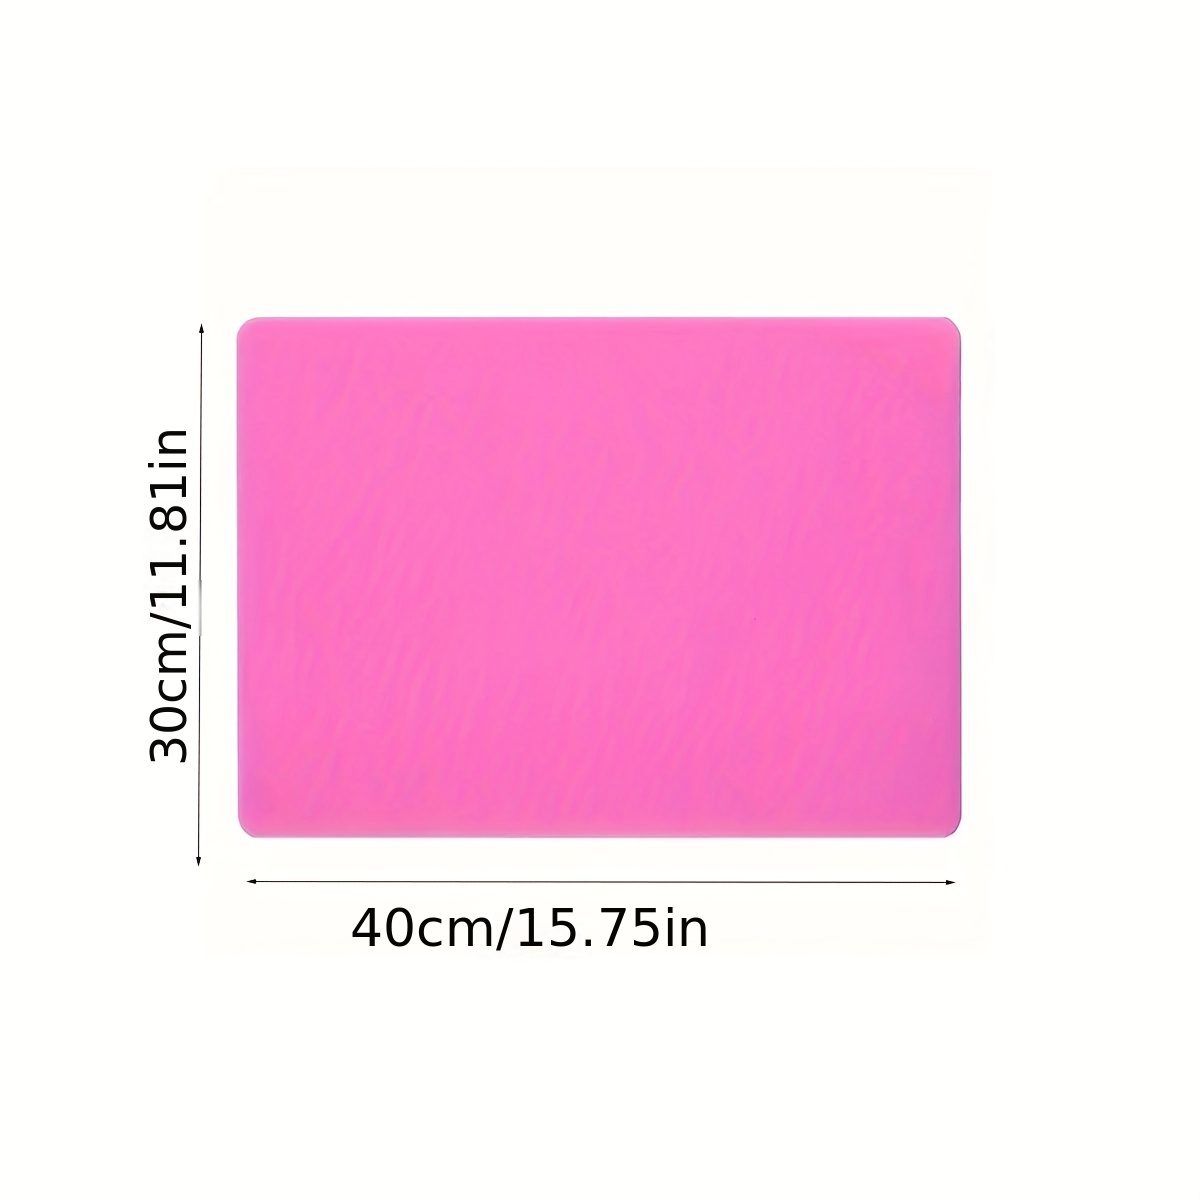 1pc 40*30cm Large Silicone Mat For Craft, Jewelry Casting Molds